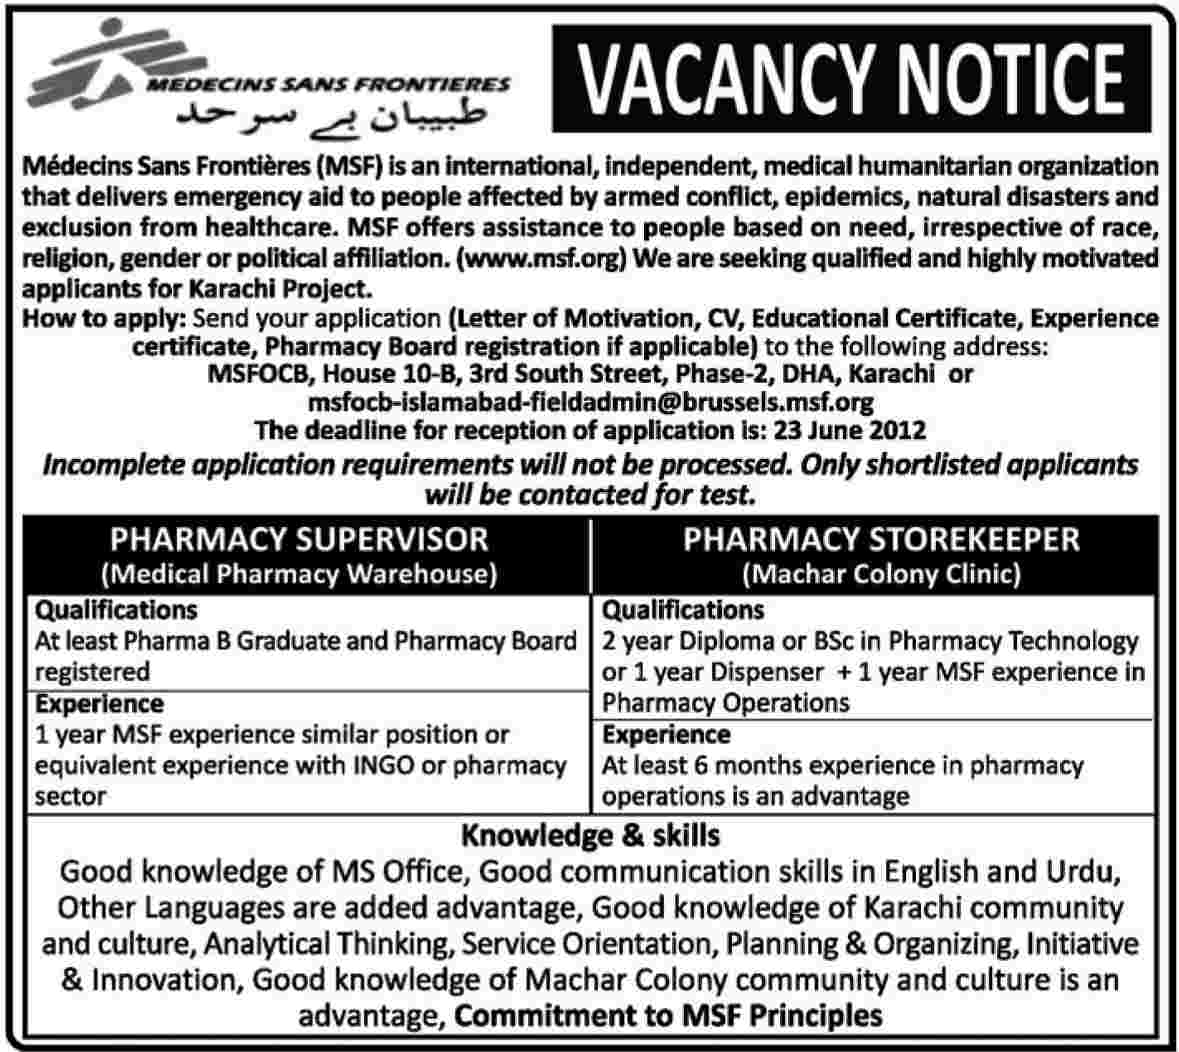 Pharmacy Supervisor and Storekeeper Required